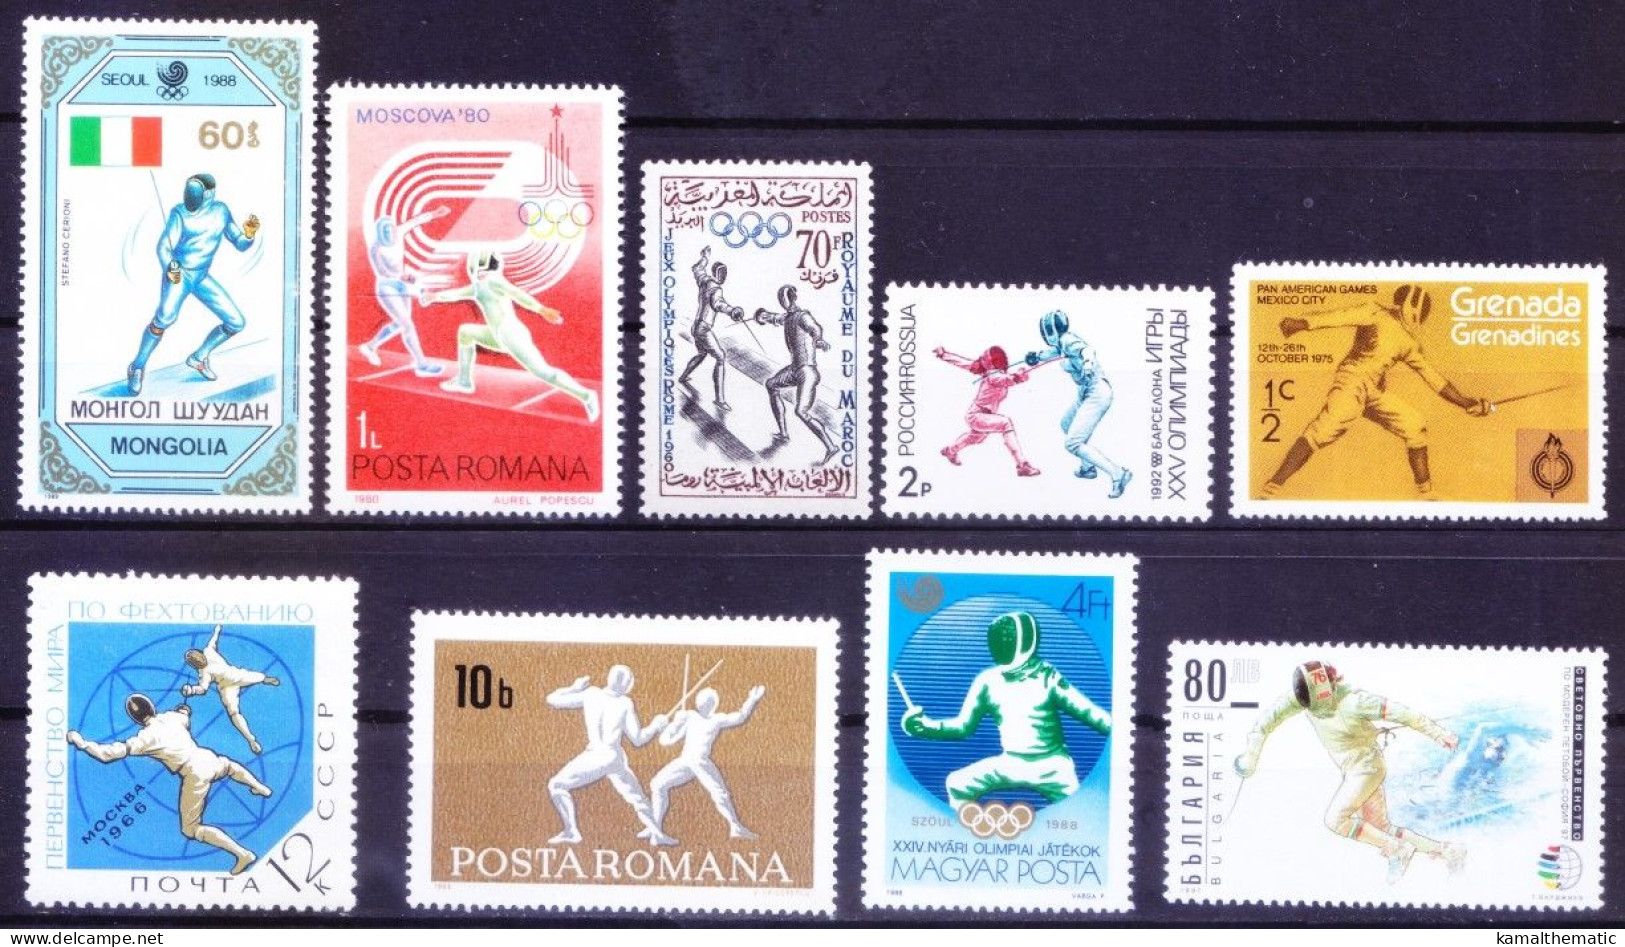 Fencing, Sword Fighting, Sports, Olympic, 9 Different MNH Stamps - Scherma